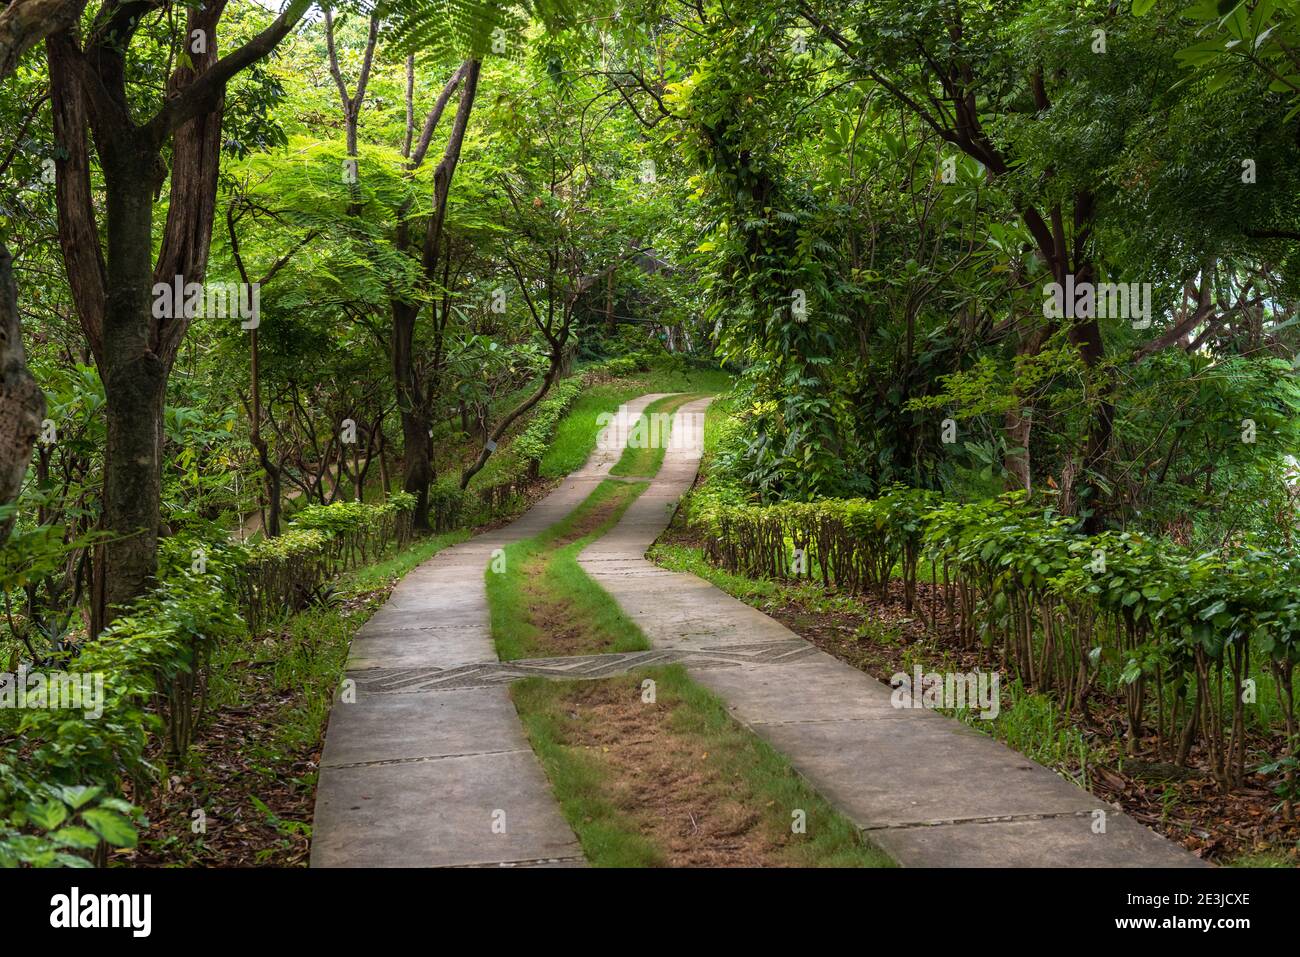 Photo of a winding path through a nature preserve in Guayaquil, Ecuador. Stock Photo